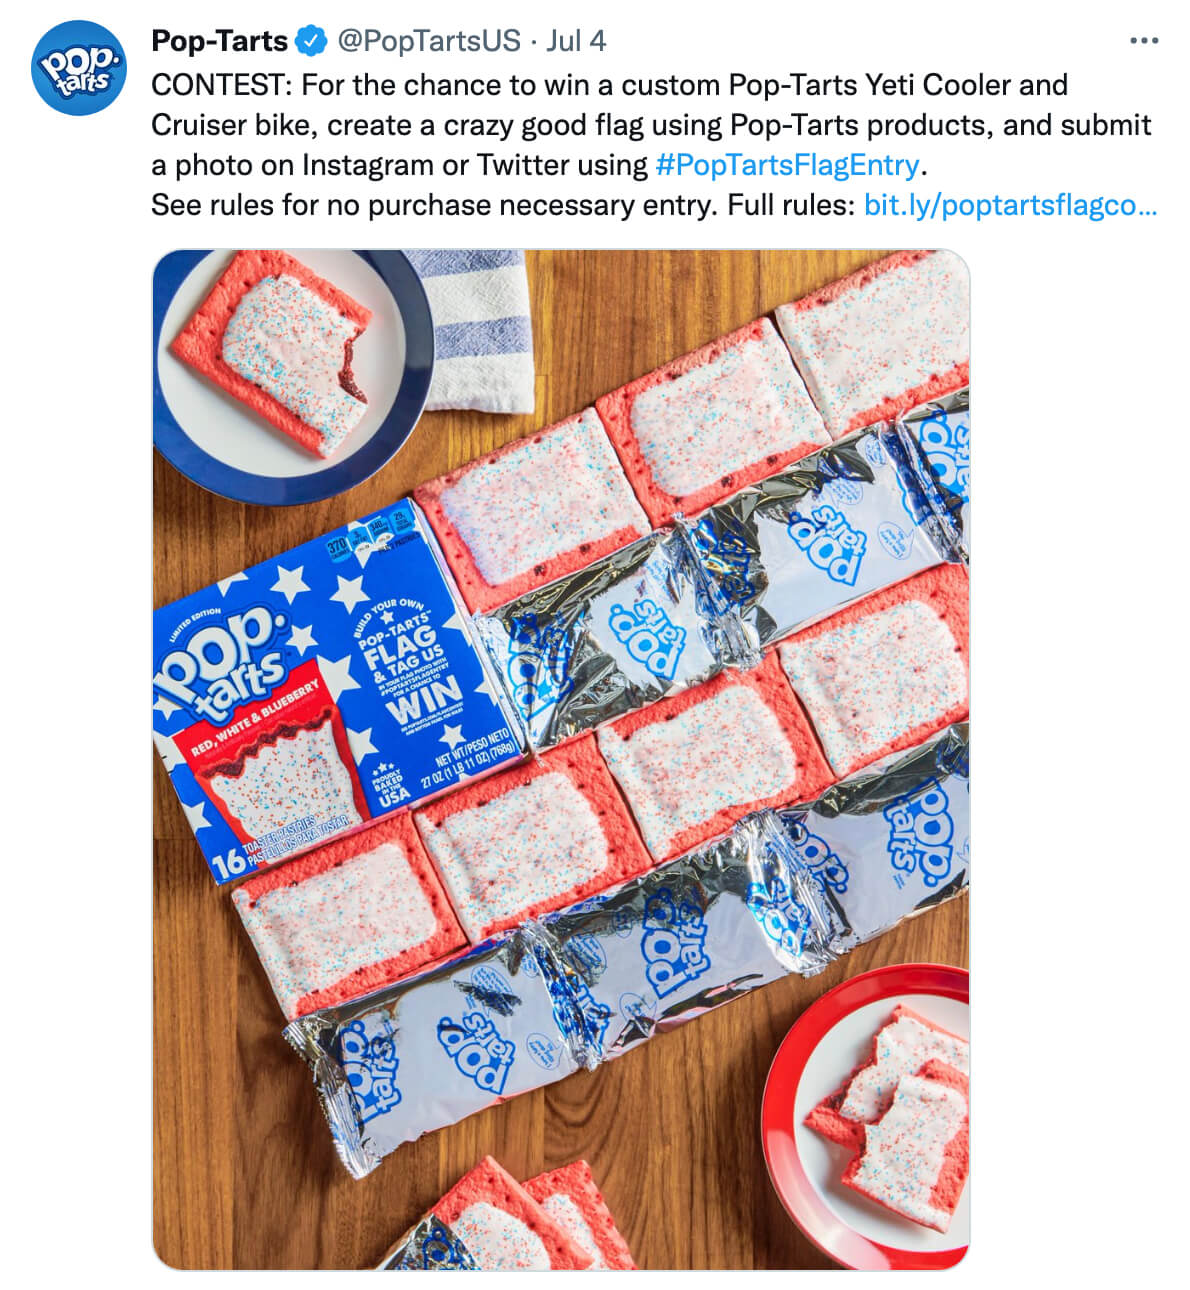 how-to-encourage-your-audience-to-create-content-to-win-prizes-seasonal-holiday-giveaways-and-contests-poptartsus-example-5